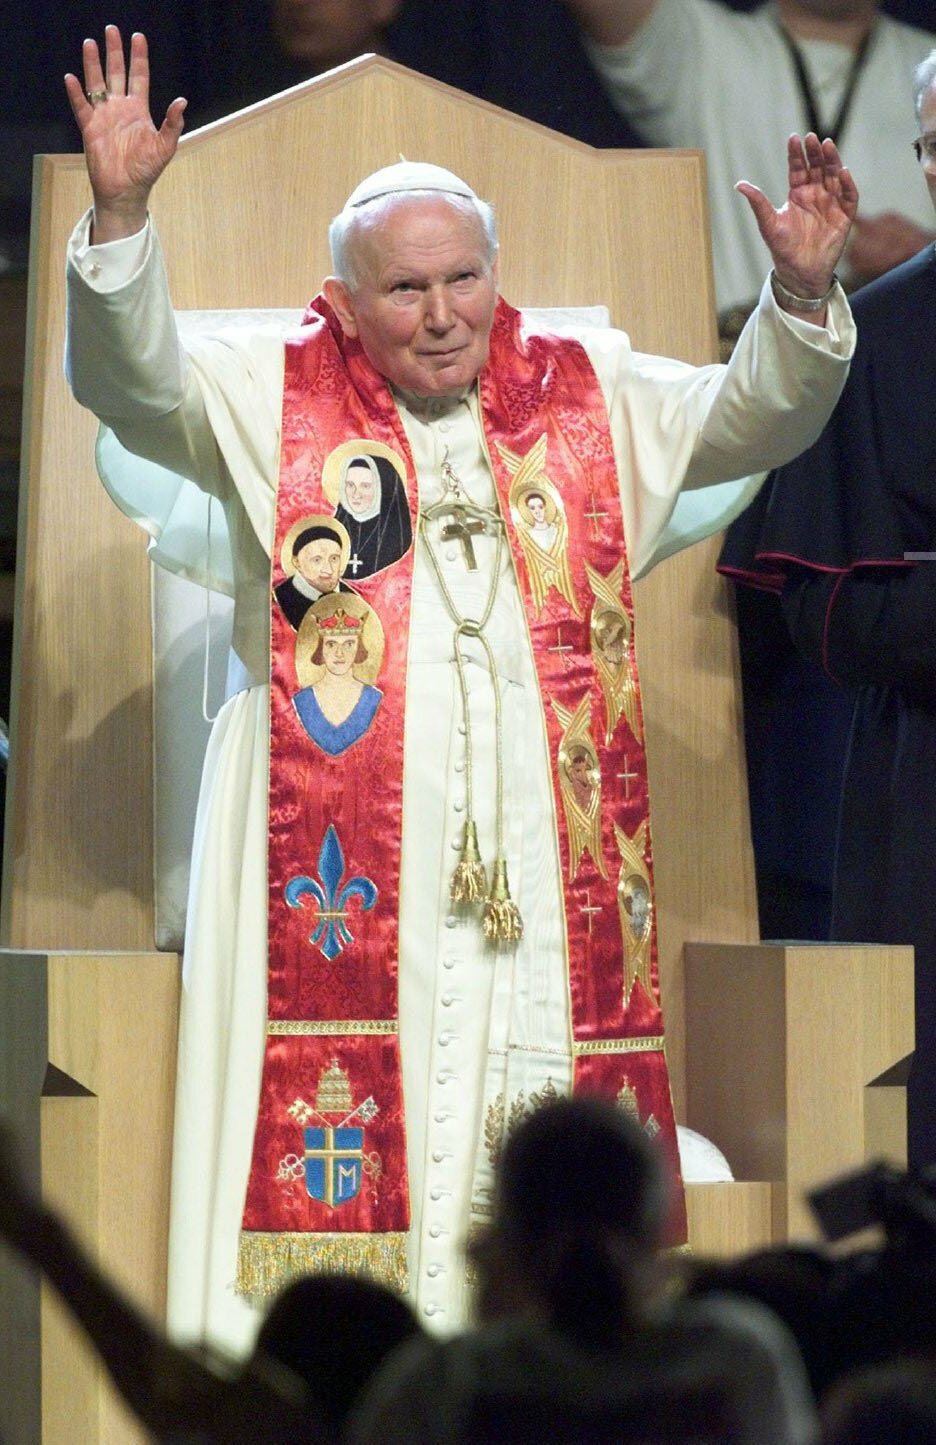 Pope John Paul II raises his arms in greeting on arrival at the Light of the World youth rally Jan. 26, 1999 at the Kiel Center in St. Louis.